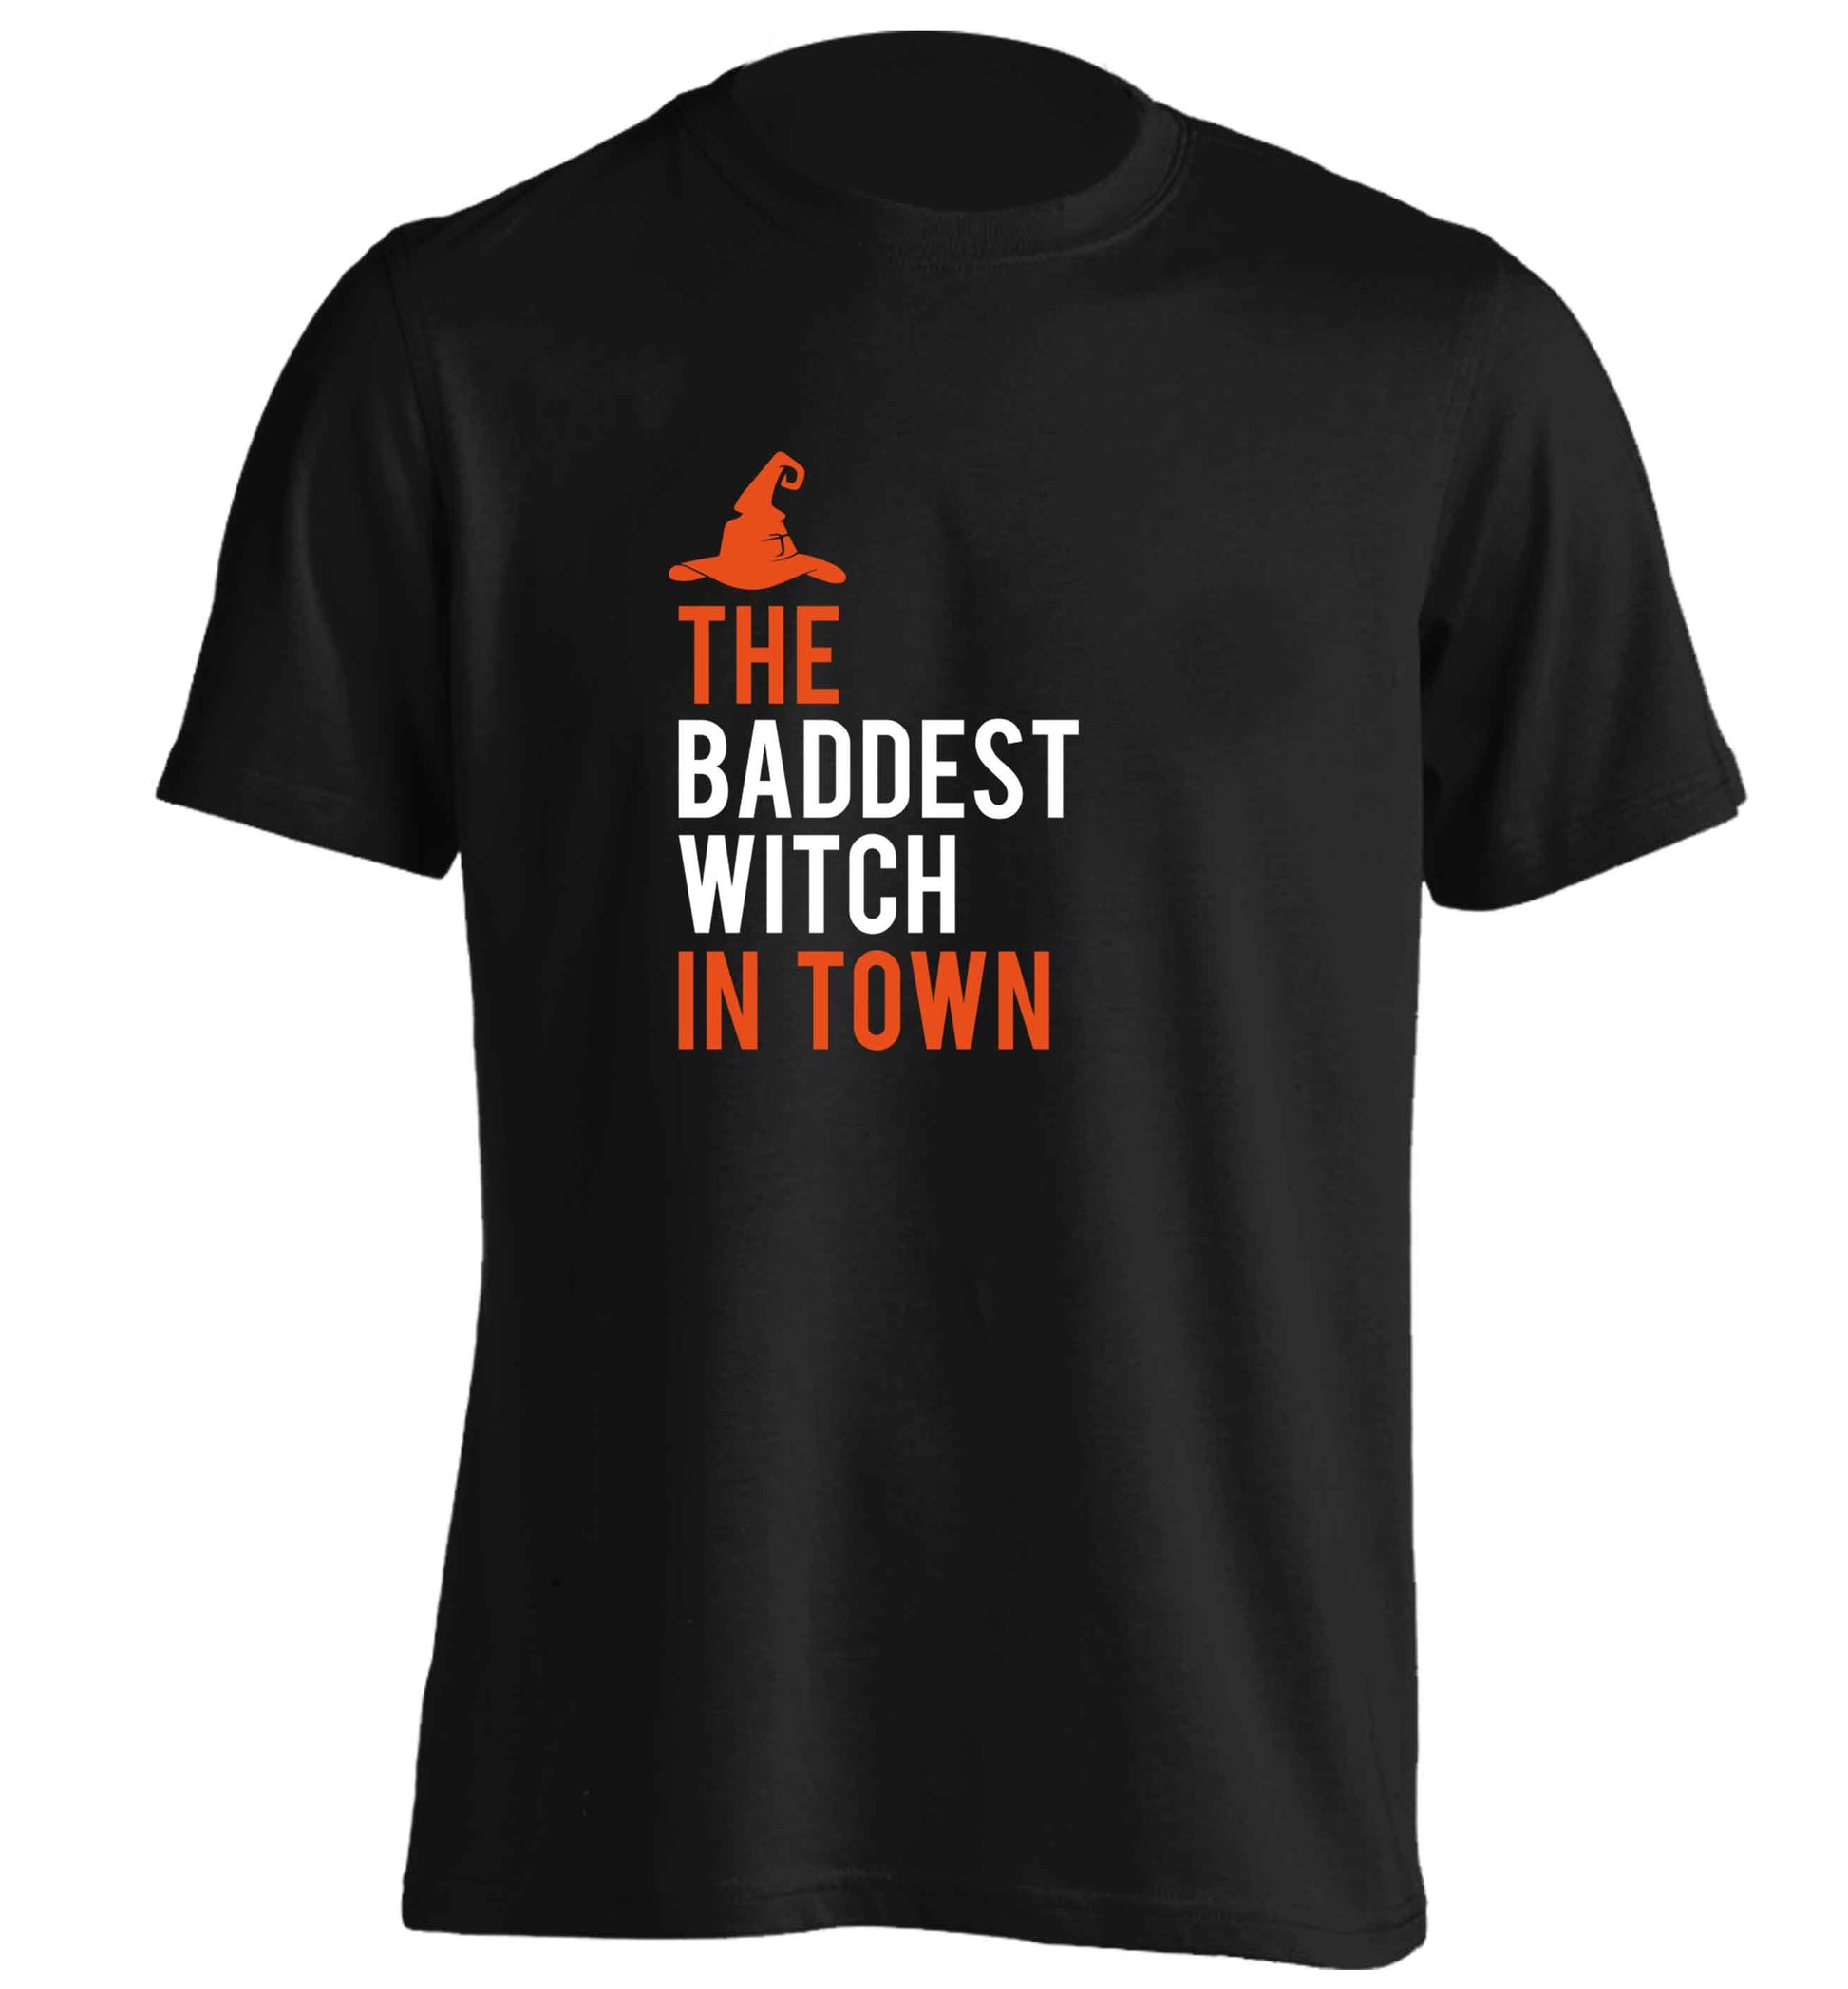 Badest witch in town adults unisex black Tshirt 2XL